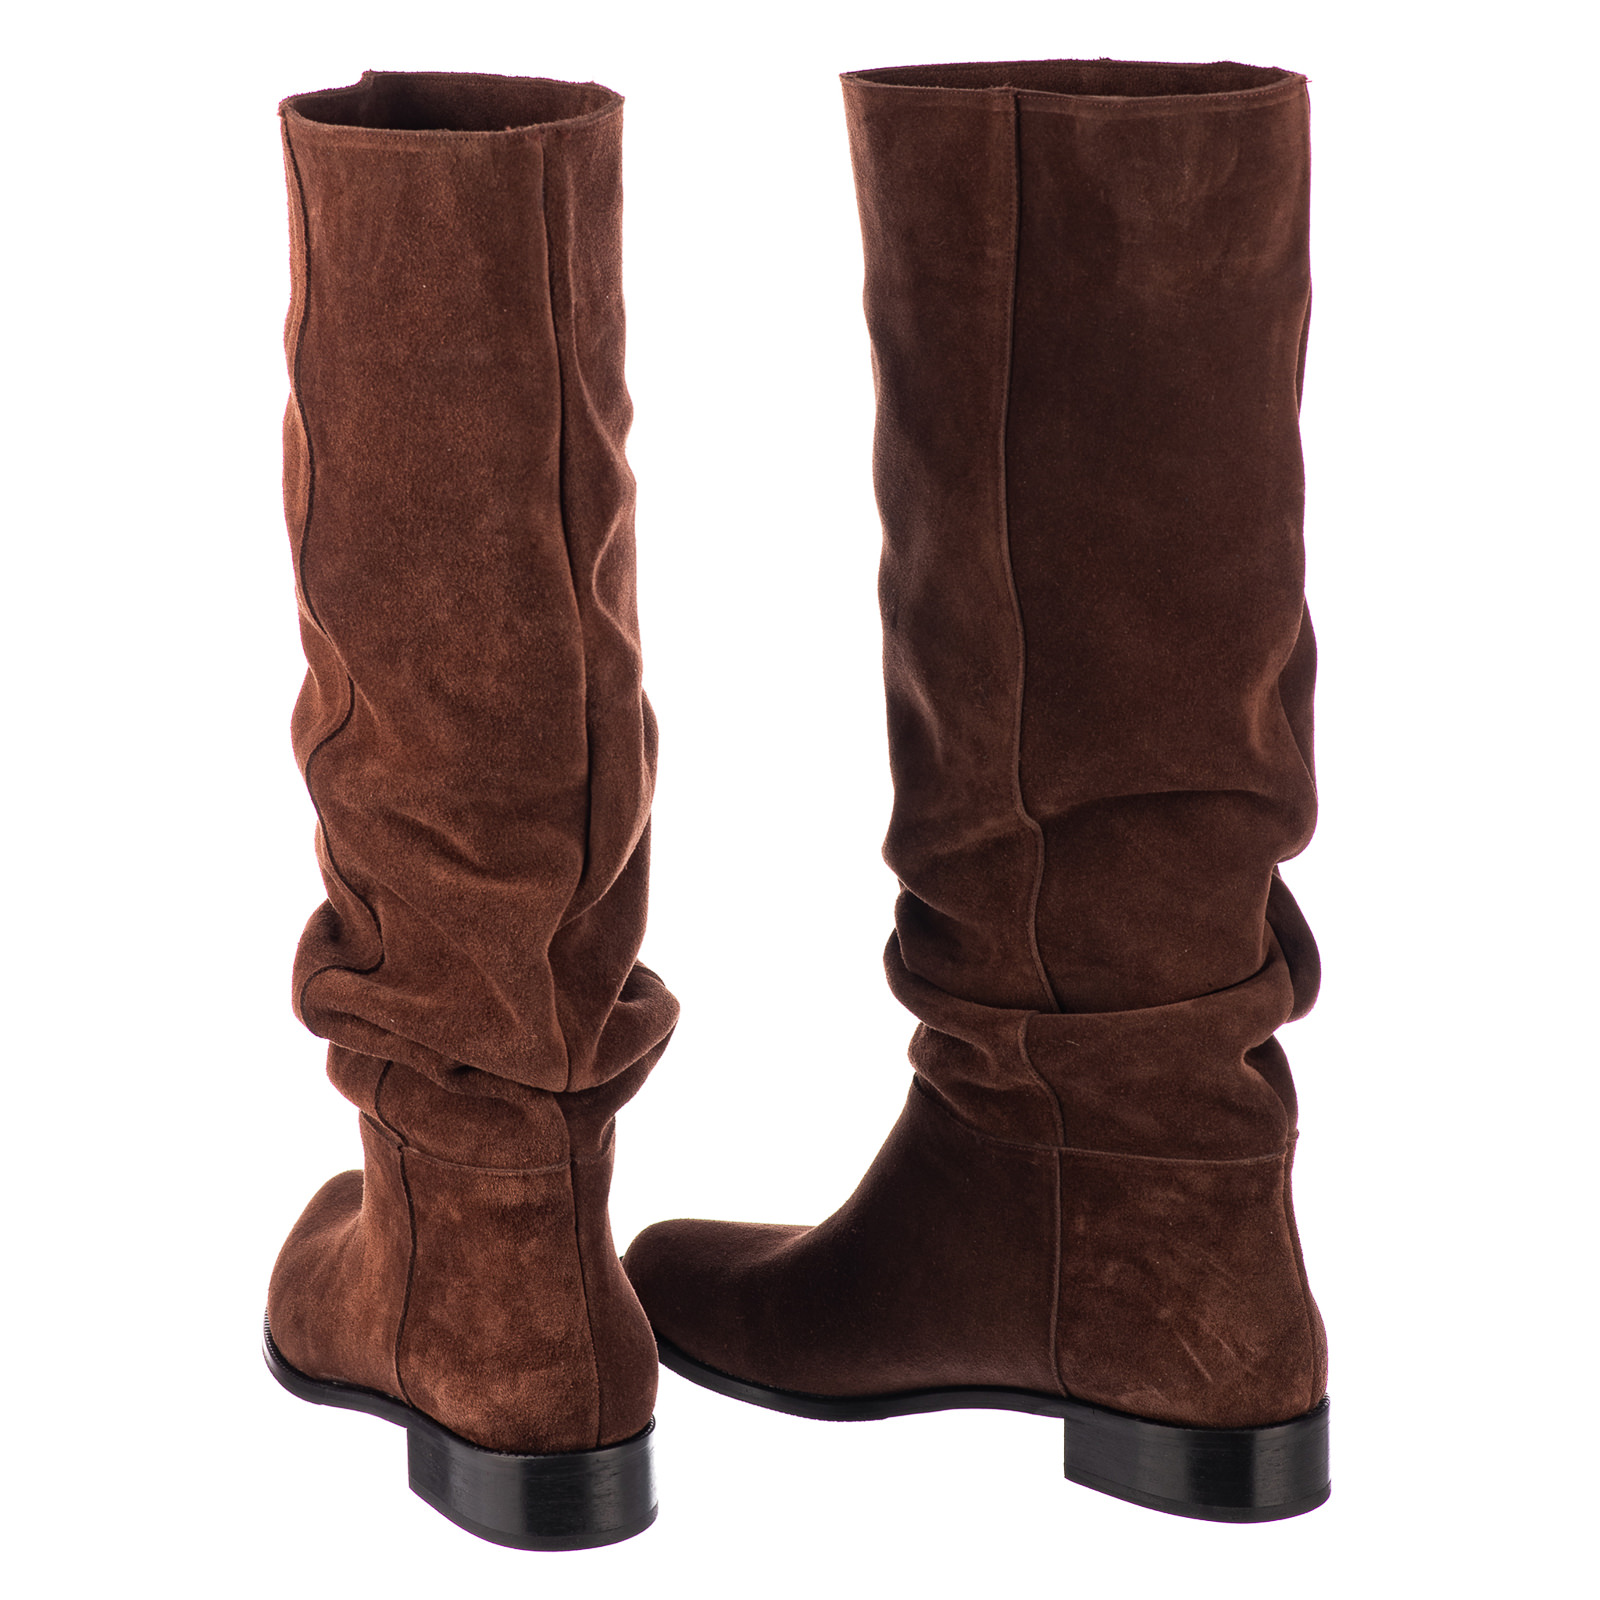 Leather boots B736 - BROWN